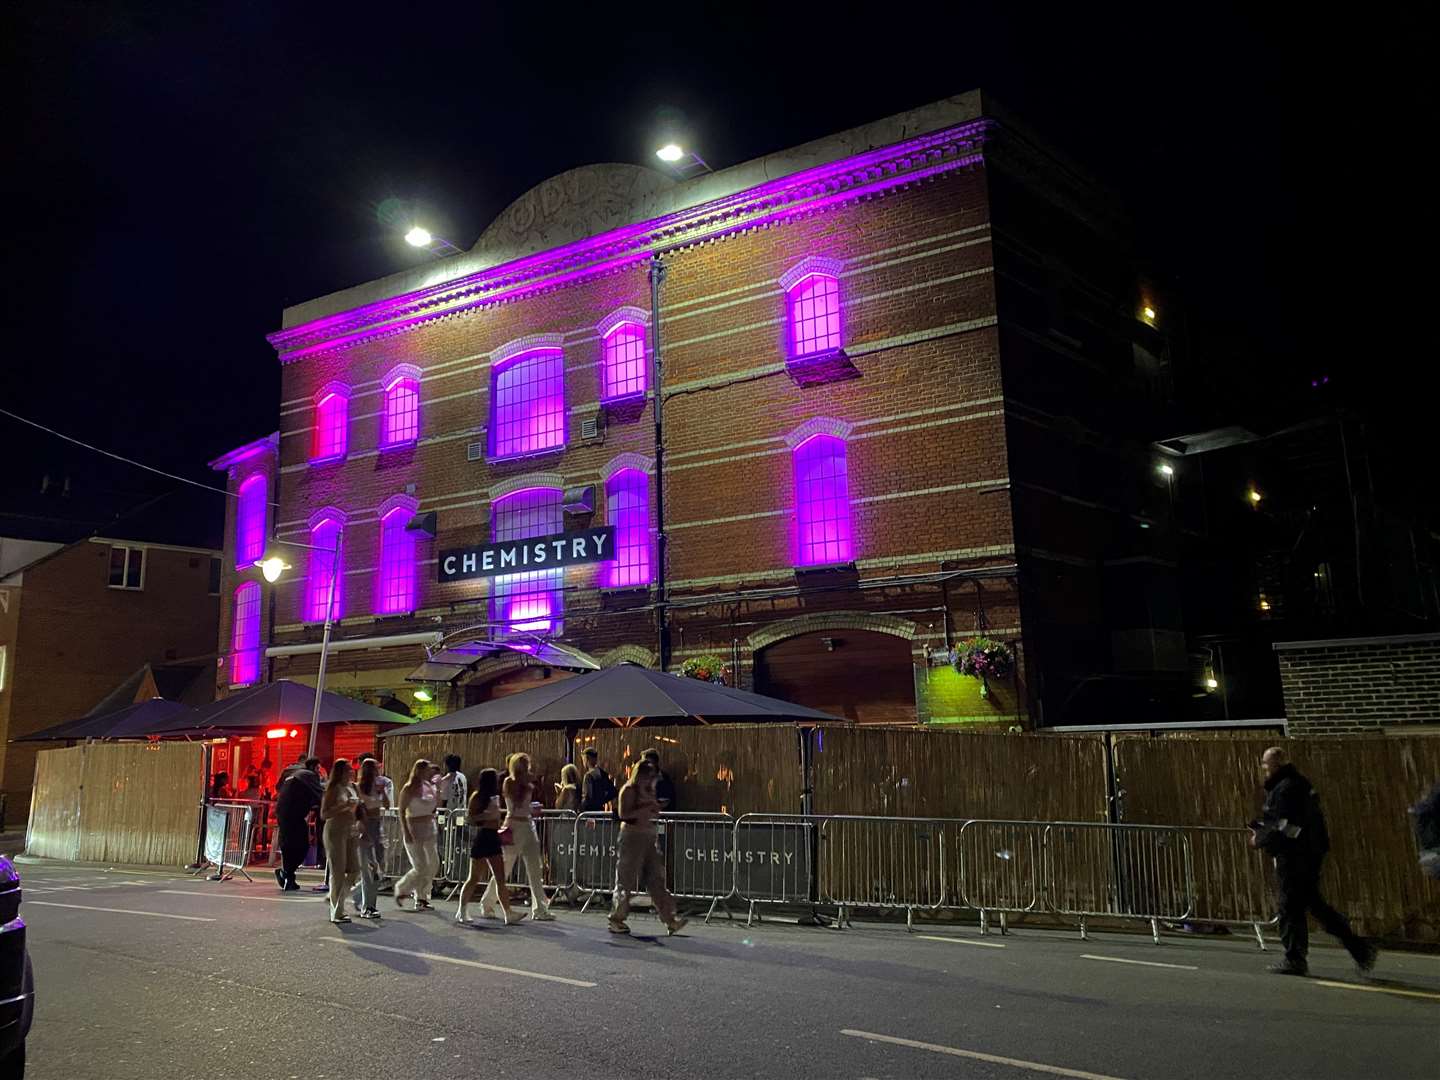 Club Chemistry is a popular Canterbury nightclub which got increasingly busy as the night went on